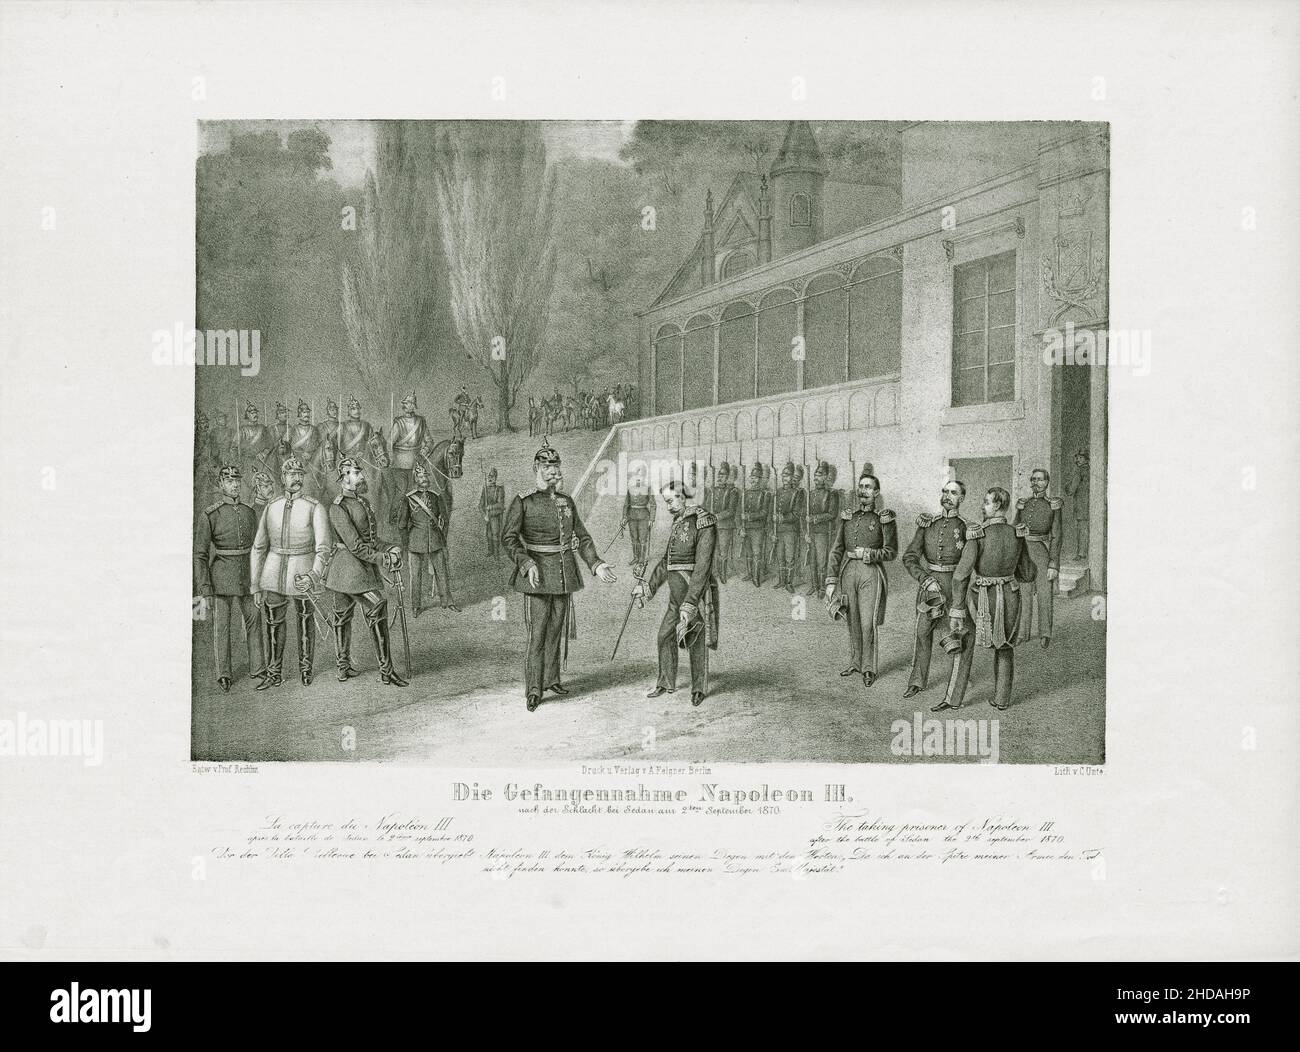 Engraving of Franco-Prussian War: The capture of Napoleon III after the Battle of Sedan on September 2, 1870 Stock Photo